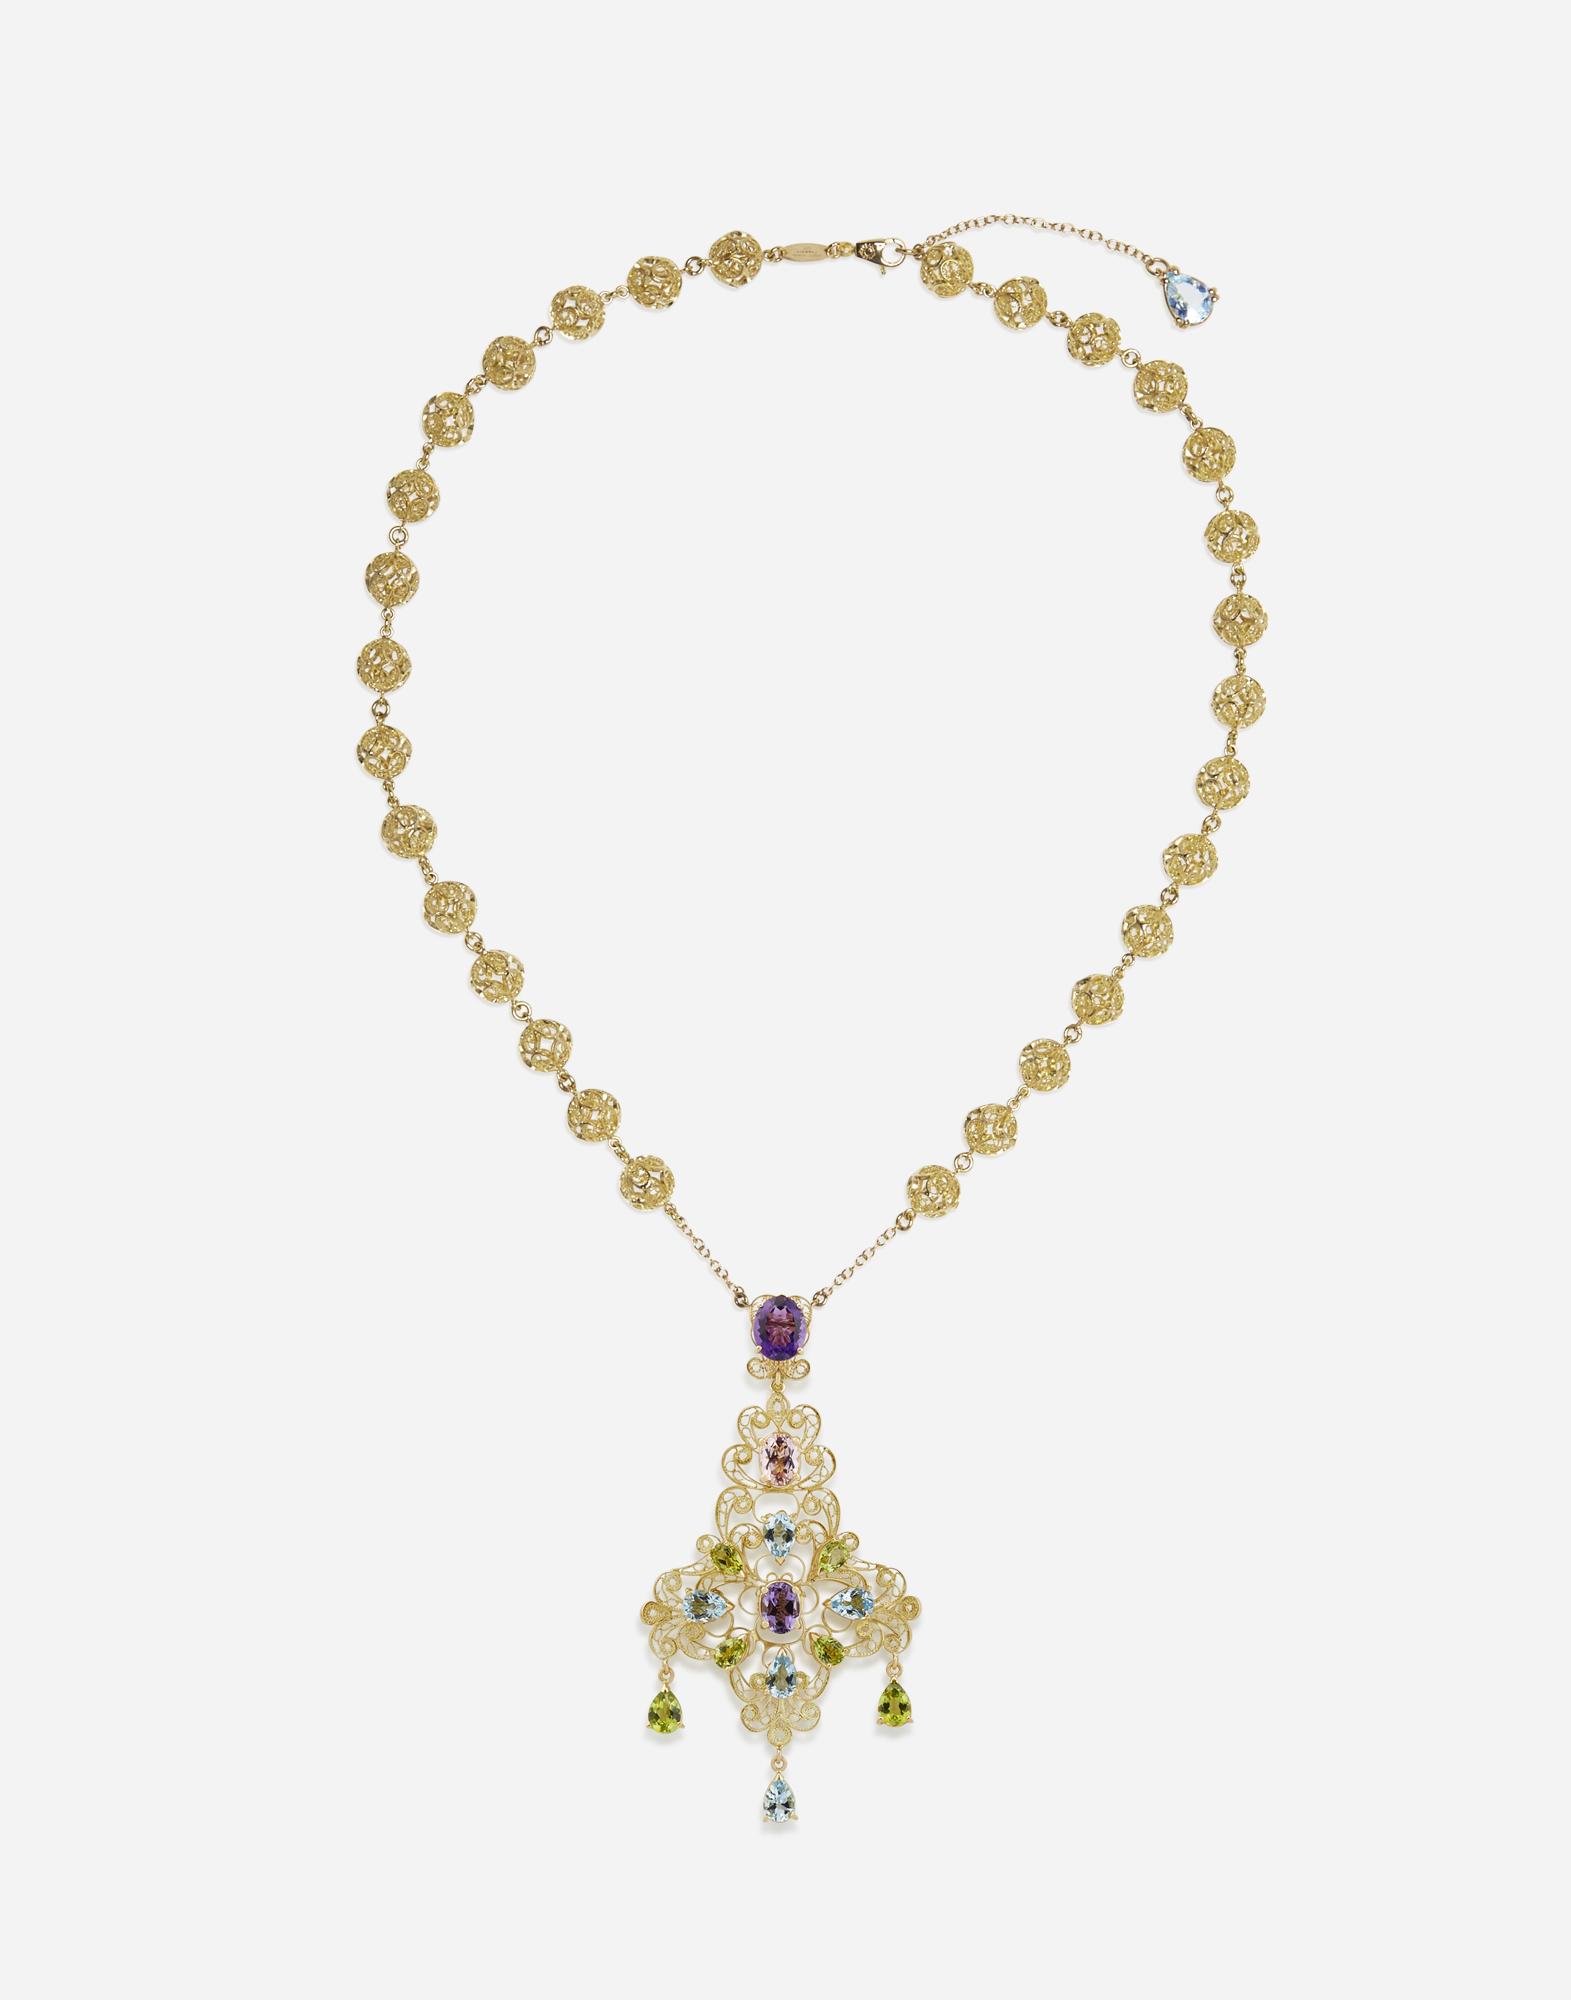 Dolce & Gabbana Pizzo Necklace In Yellow Gold Filigree With Amethysts, Aquamarines, Peridots And Morganite